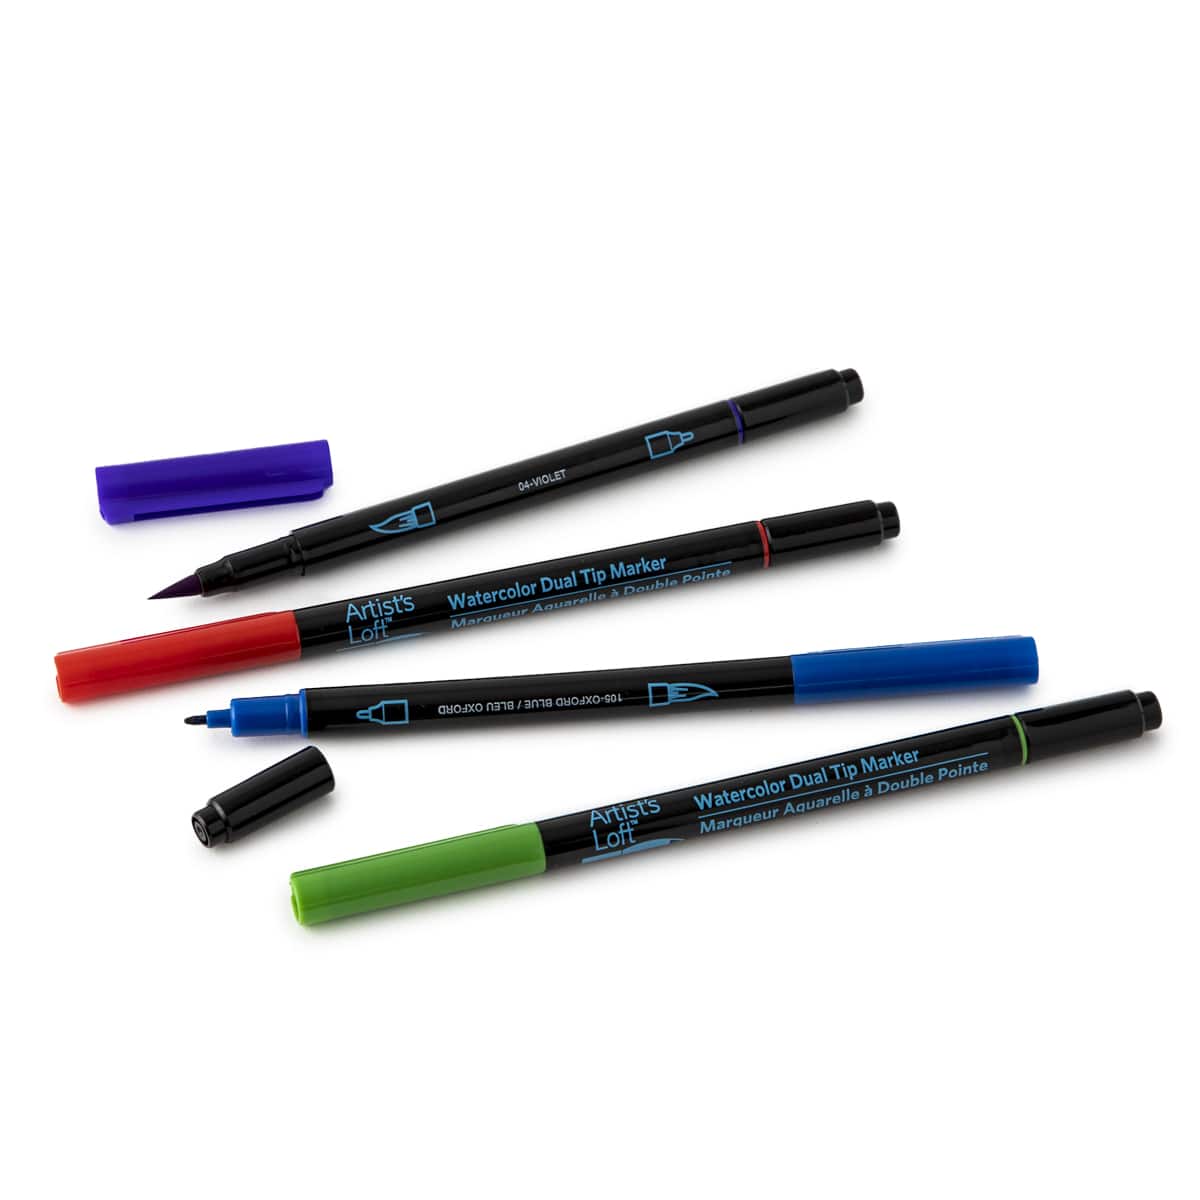 FIXSMITH Dual Brush Marker Pens - 24 Colored Art Markers, Fine